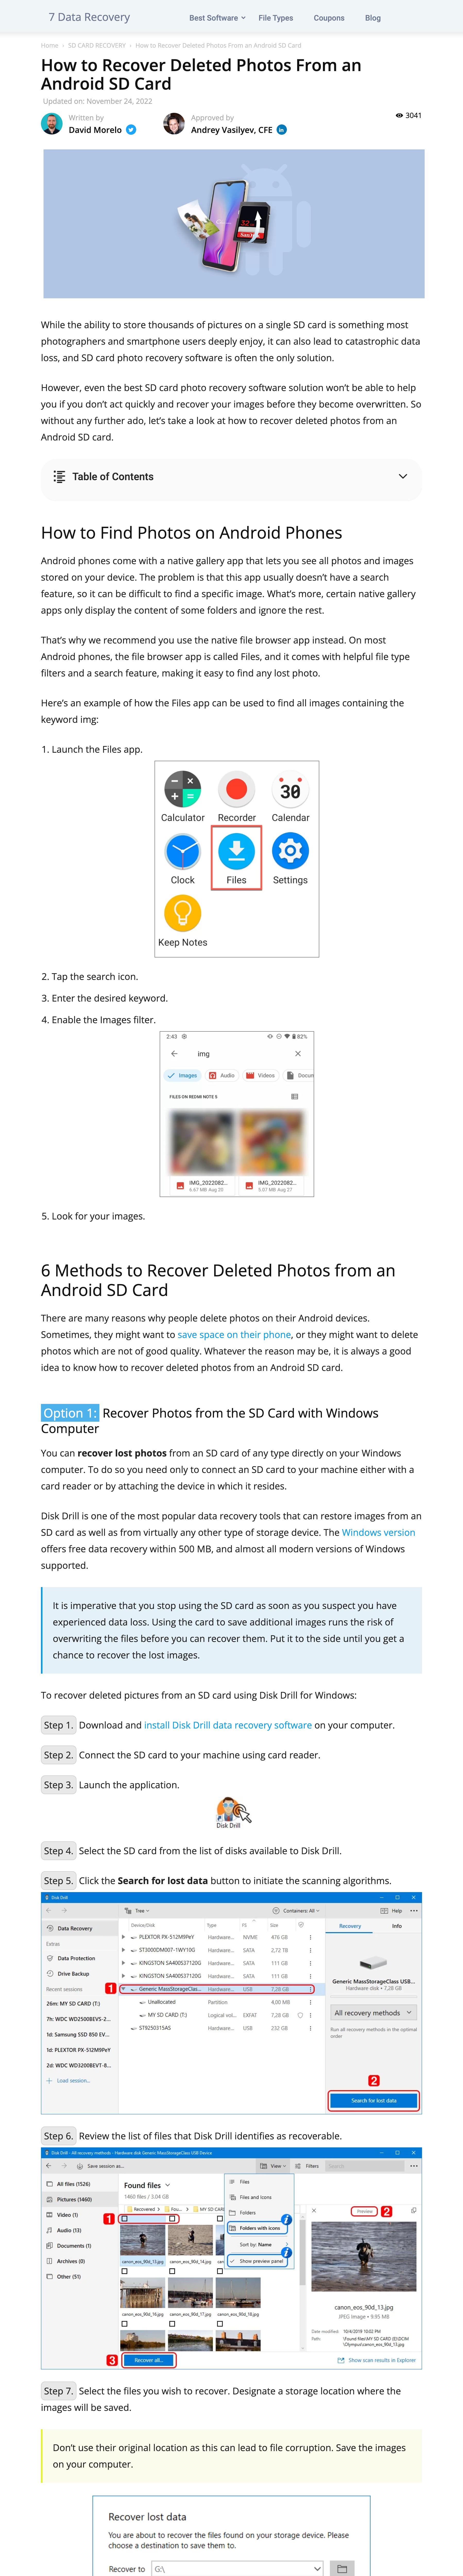 How to Recover Deleted Photos From an Android SD Card